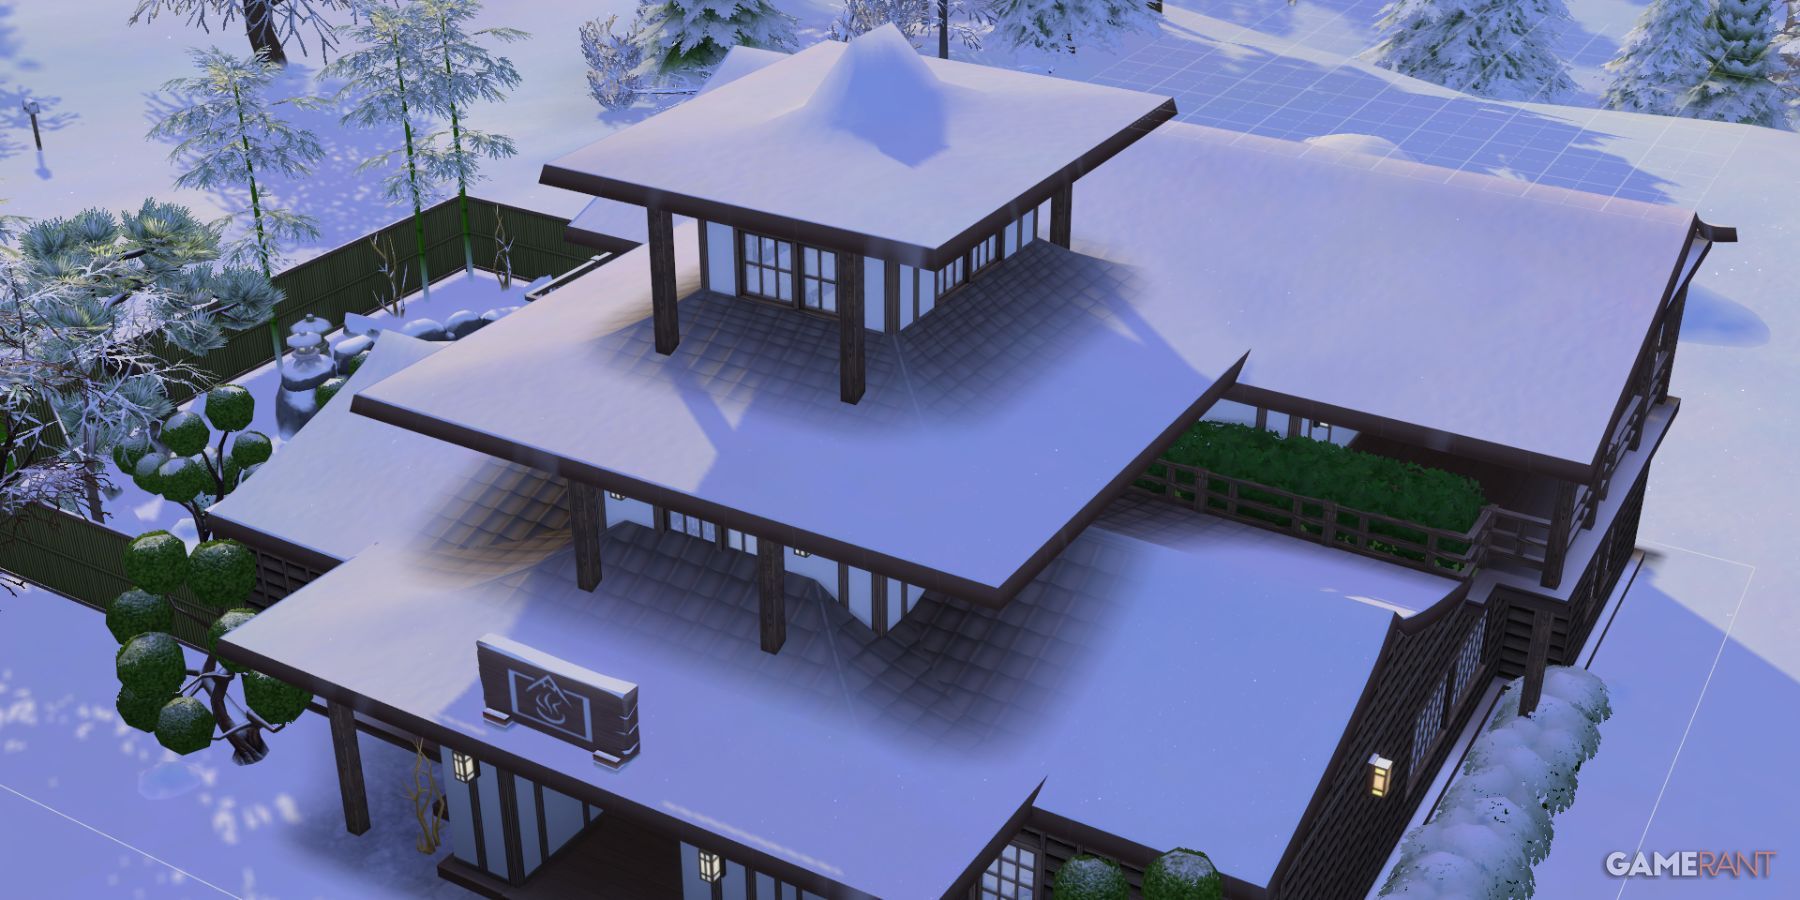 The Sims 4 Japanese Roofing